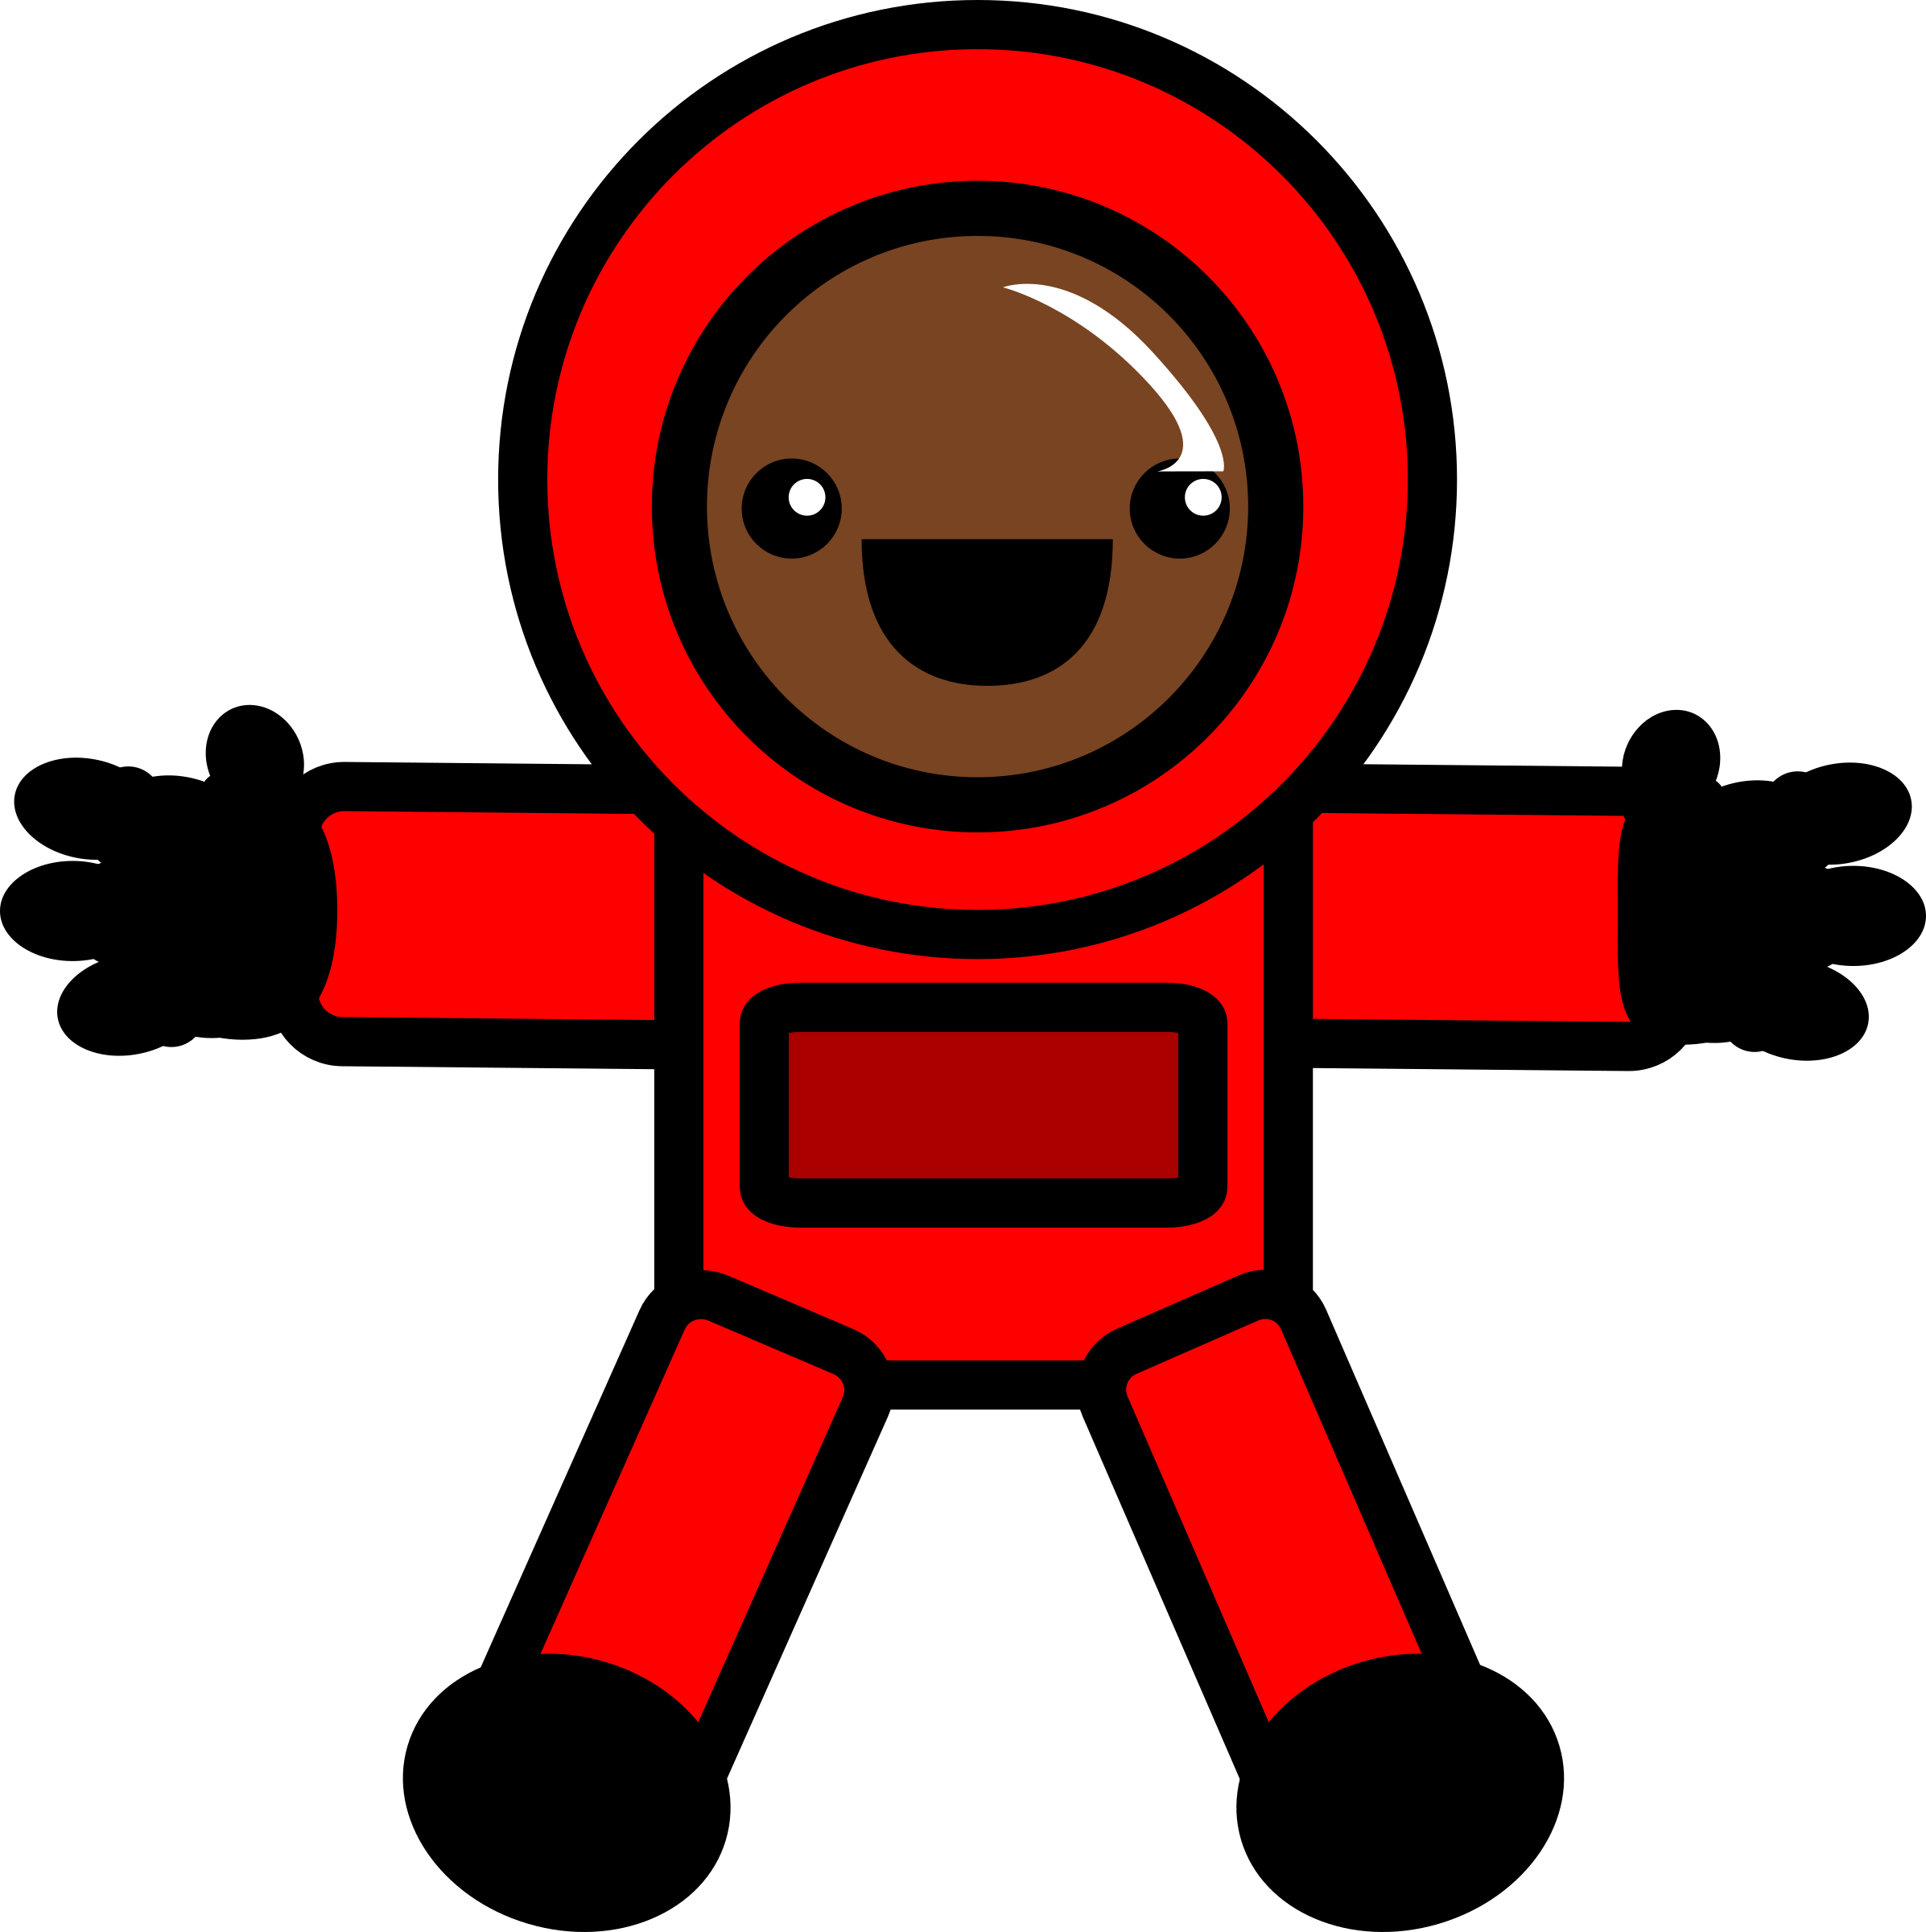 Astronaut in Red Space Suit vector clipart image